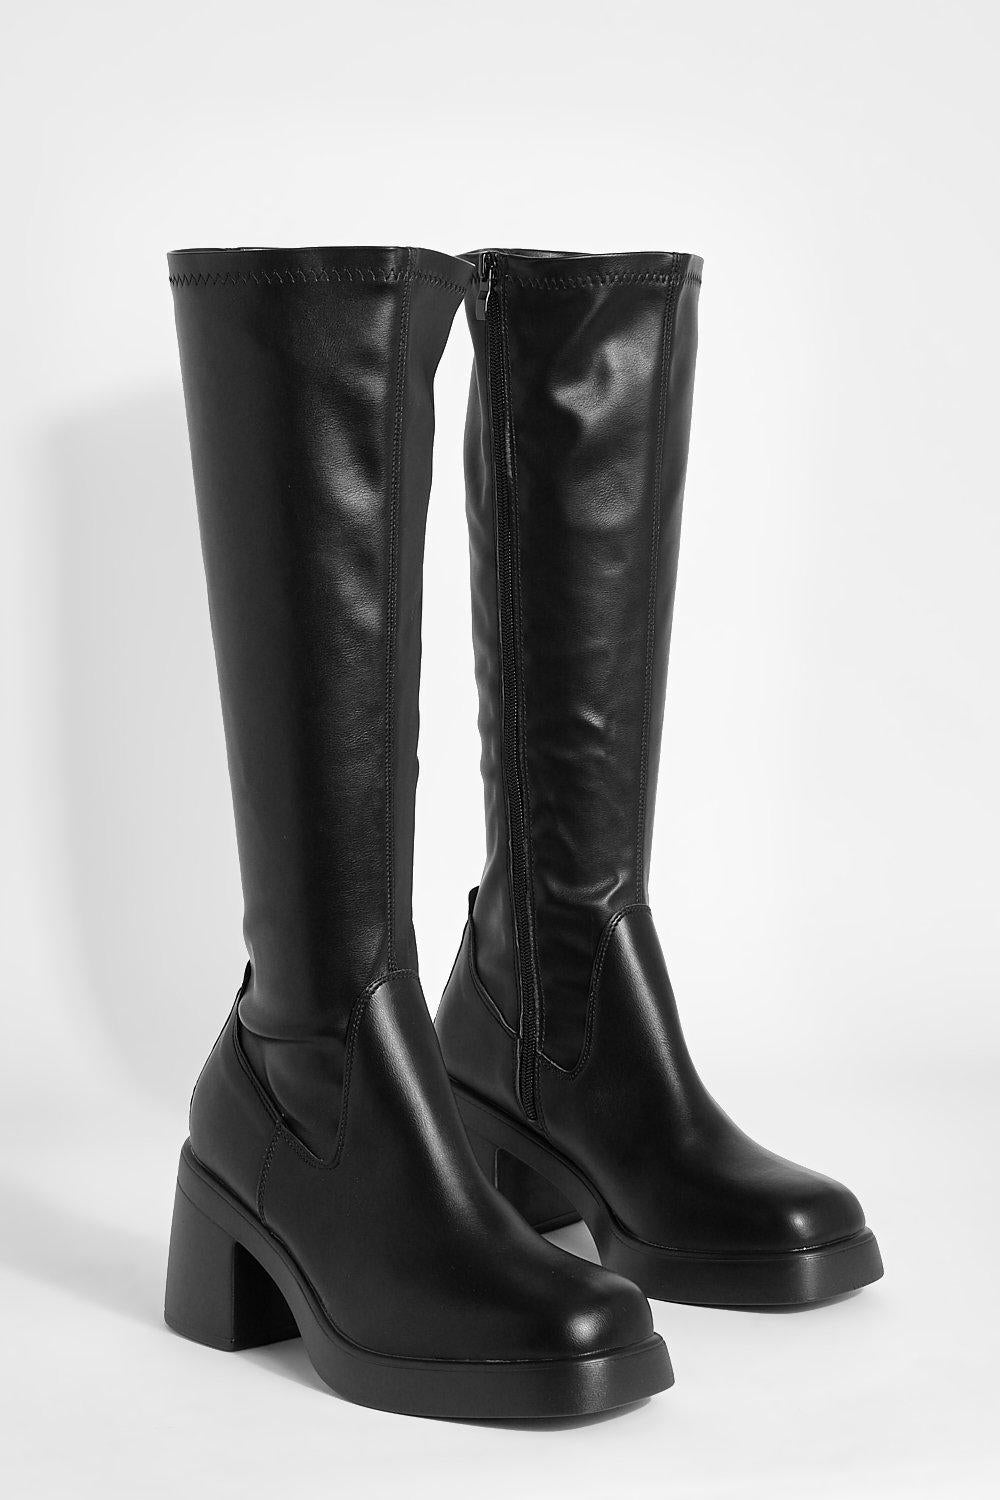 Black PU Block Heel Calf High Boots with Square Toe